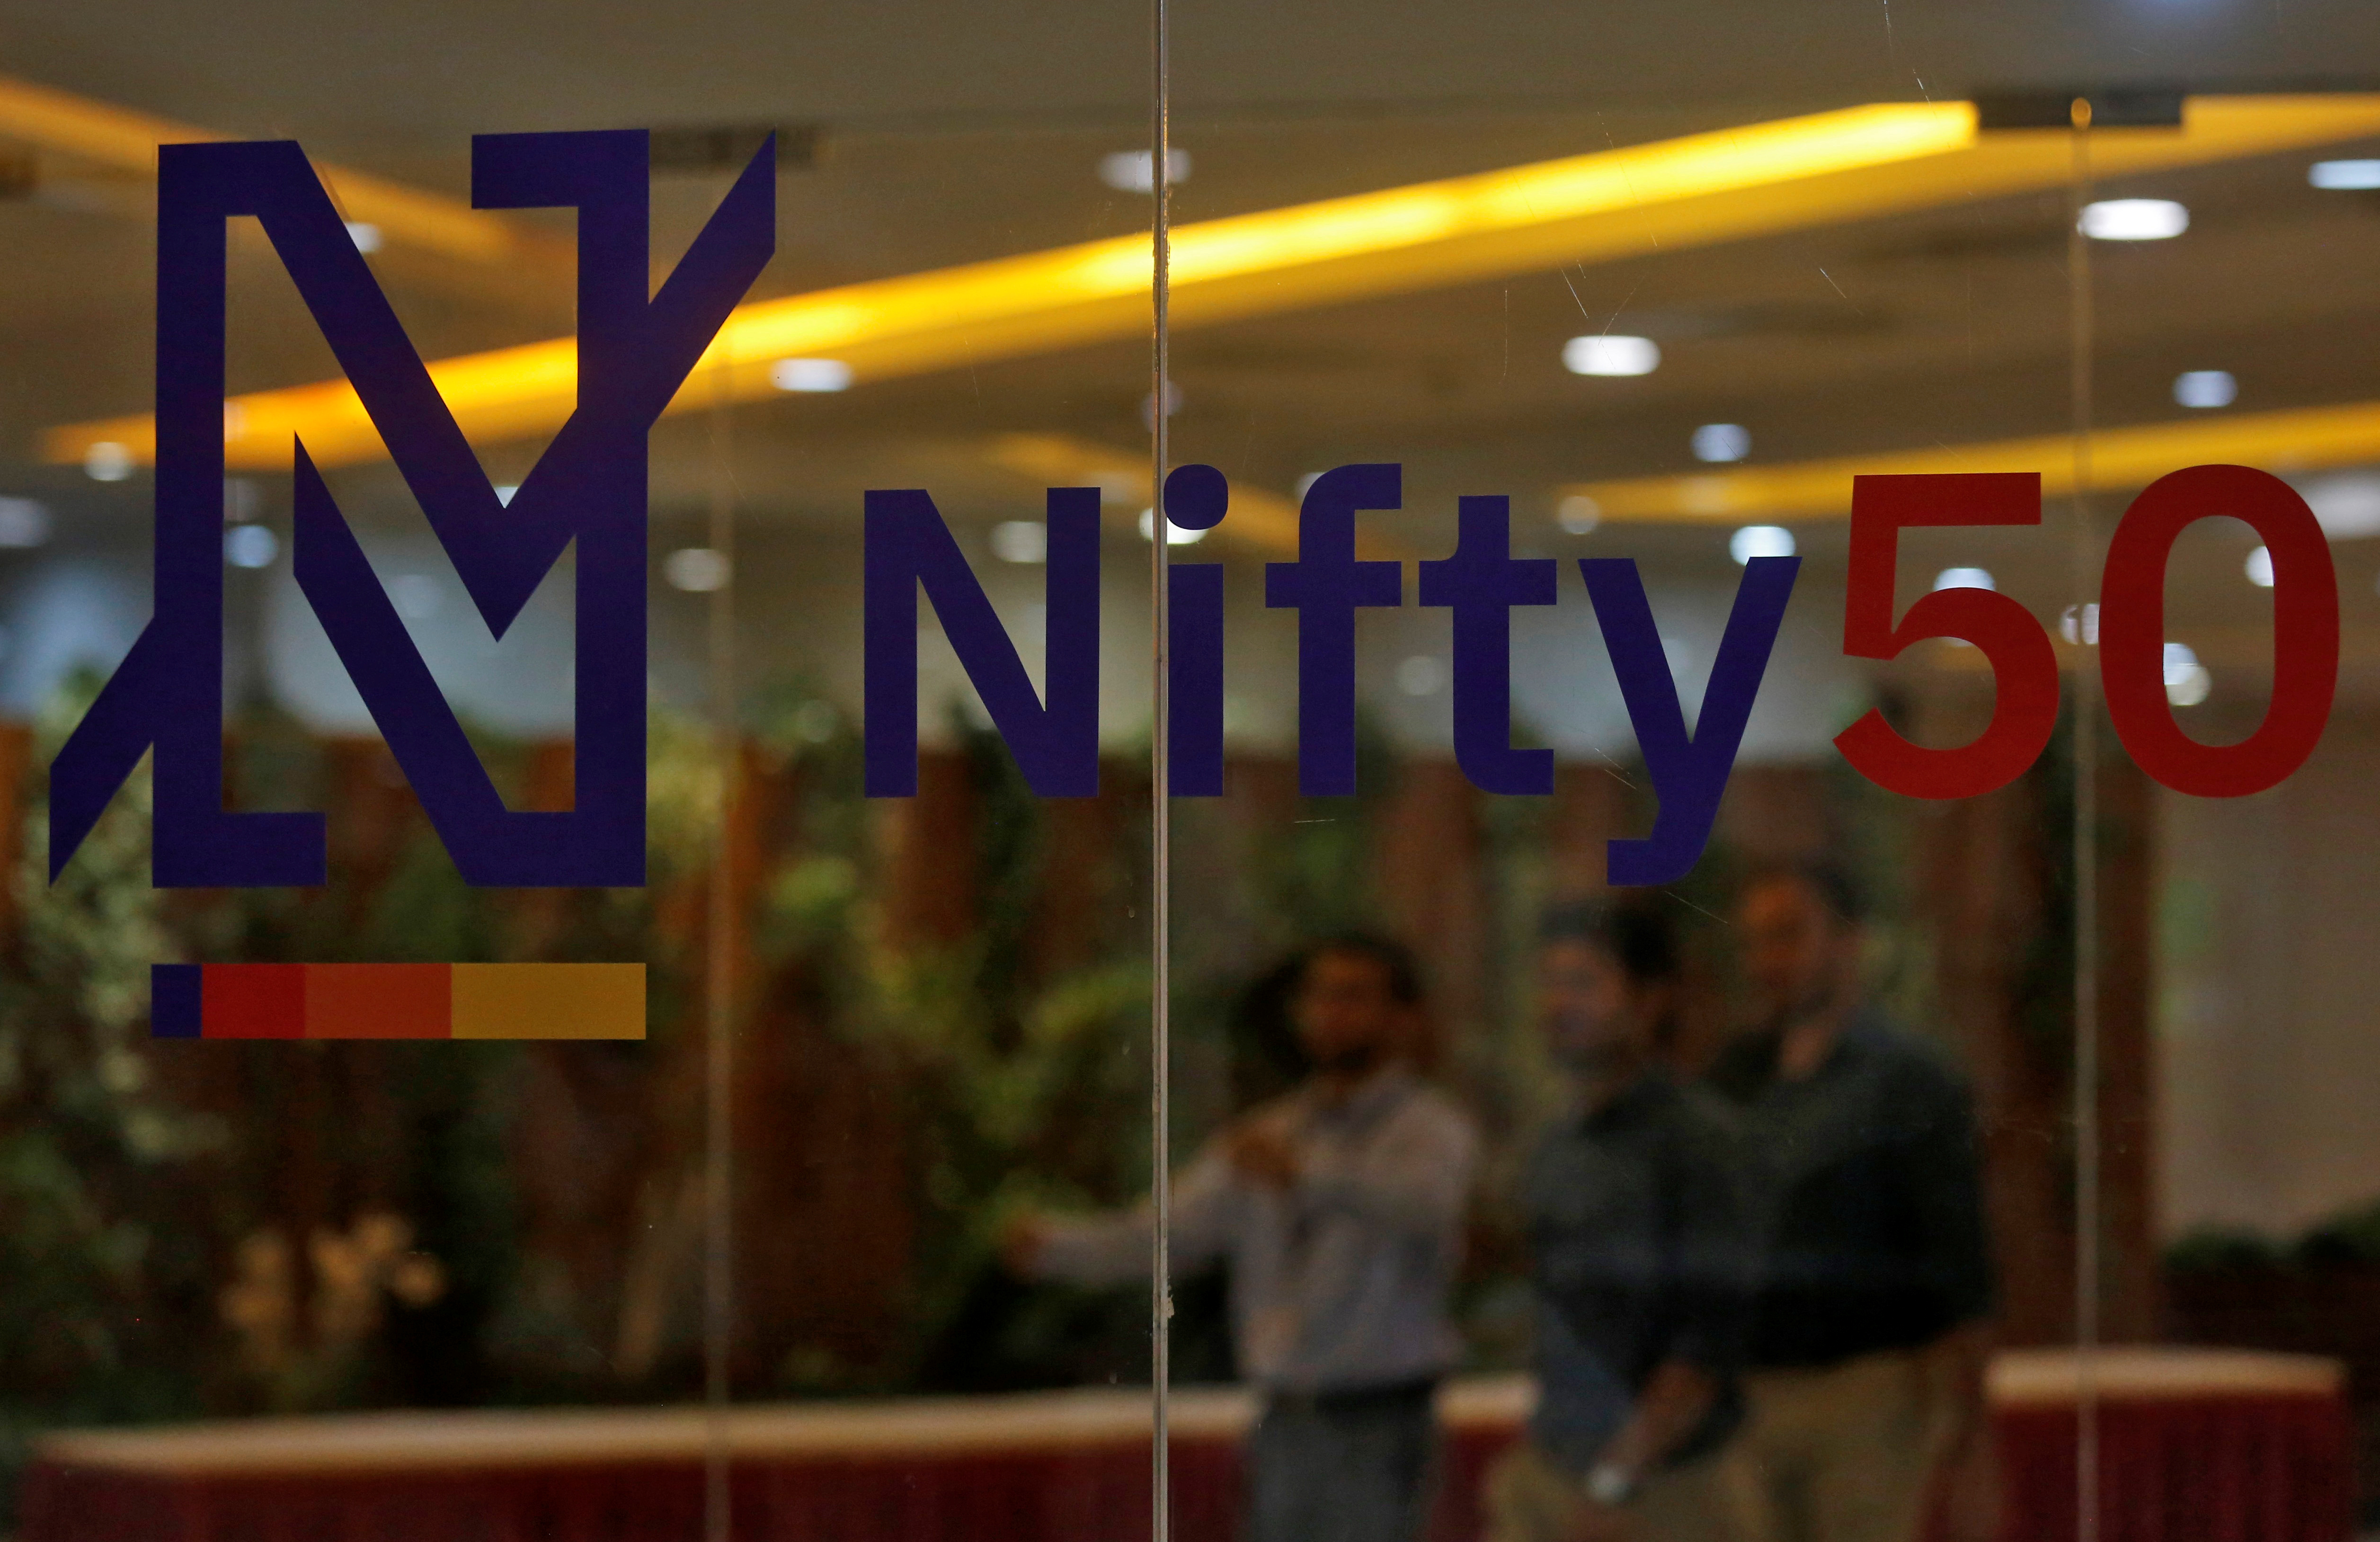 People walk past a new brand identity for Nifty Indices inside the National Stock Exchange building in Mumbai